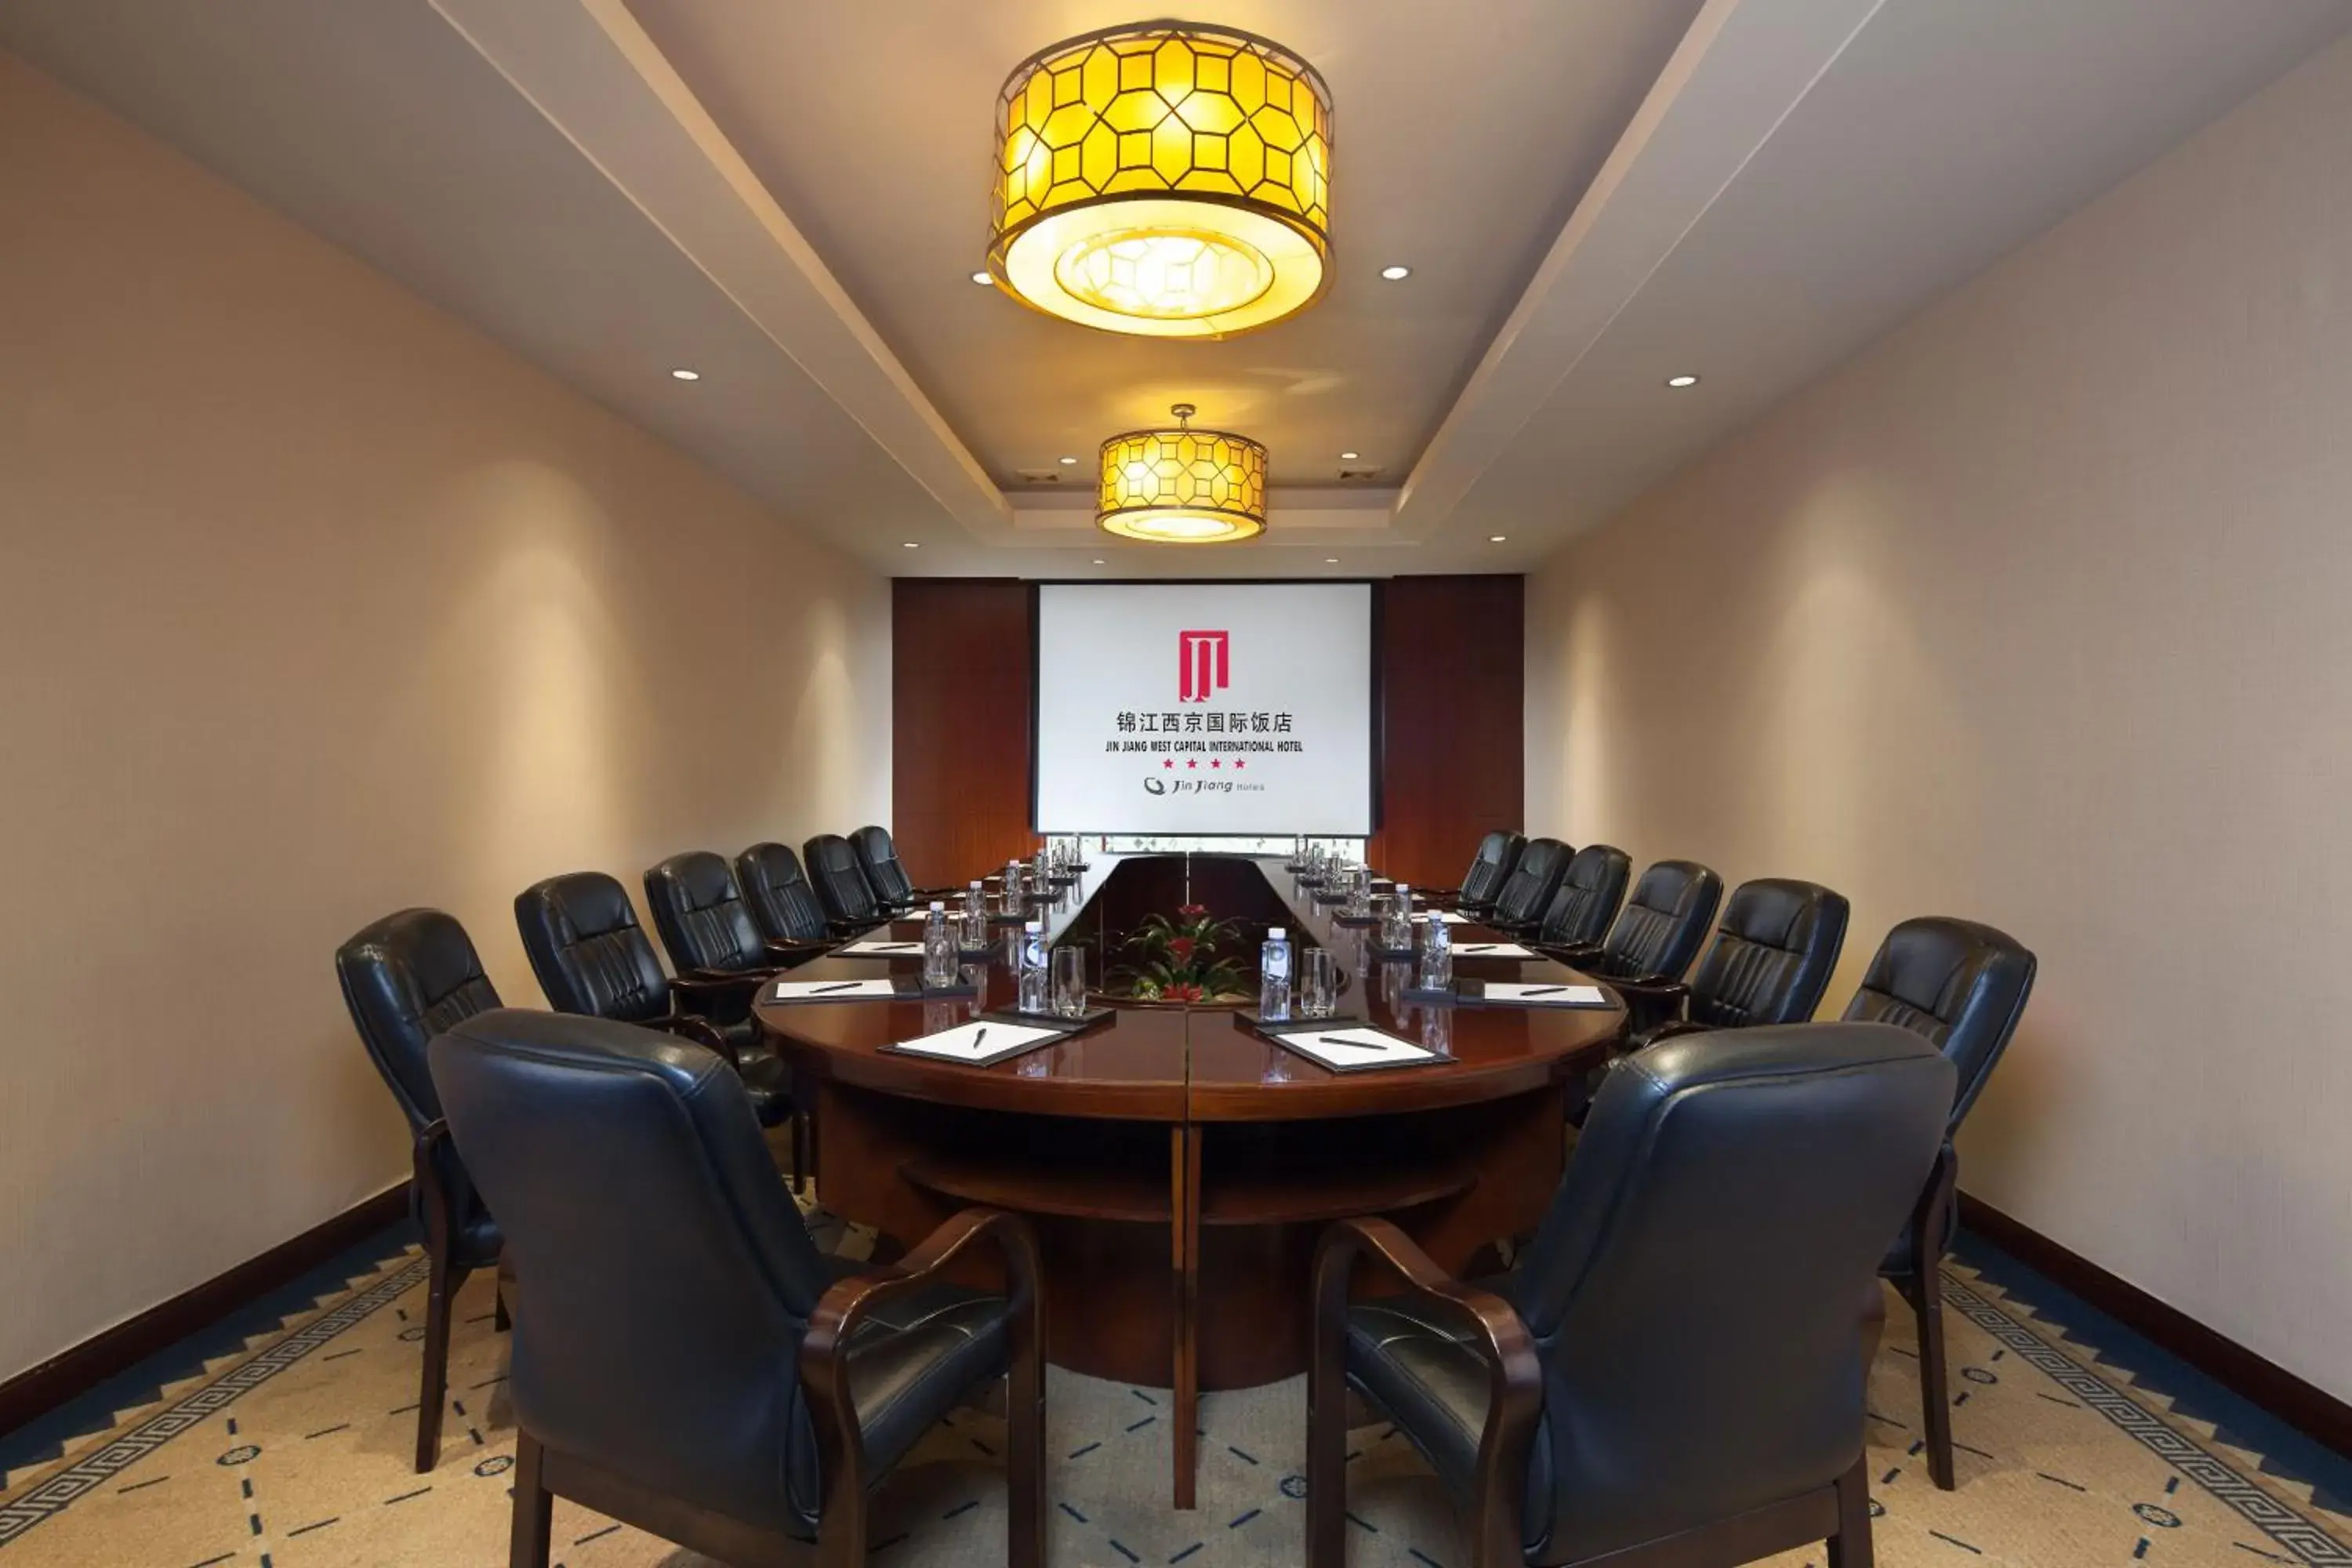 Meeting/conference room in Jinjiang West Capital International Hotel